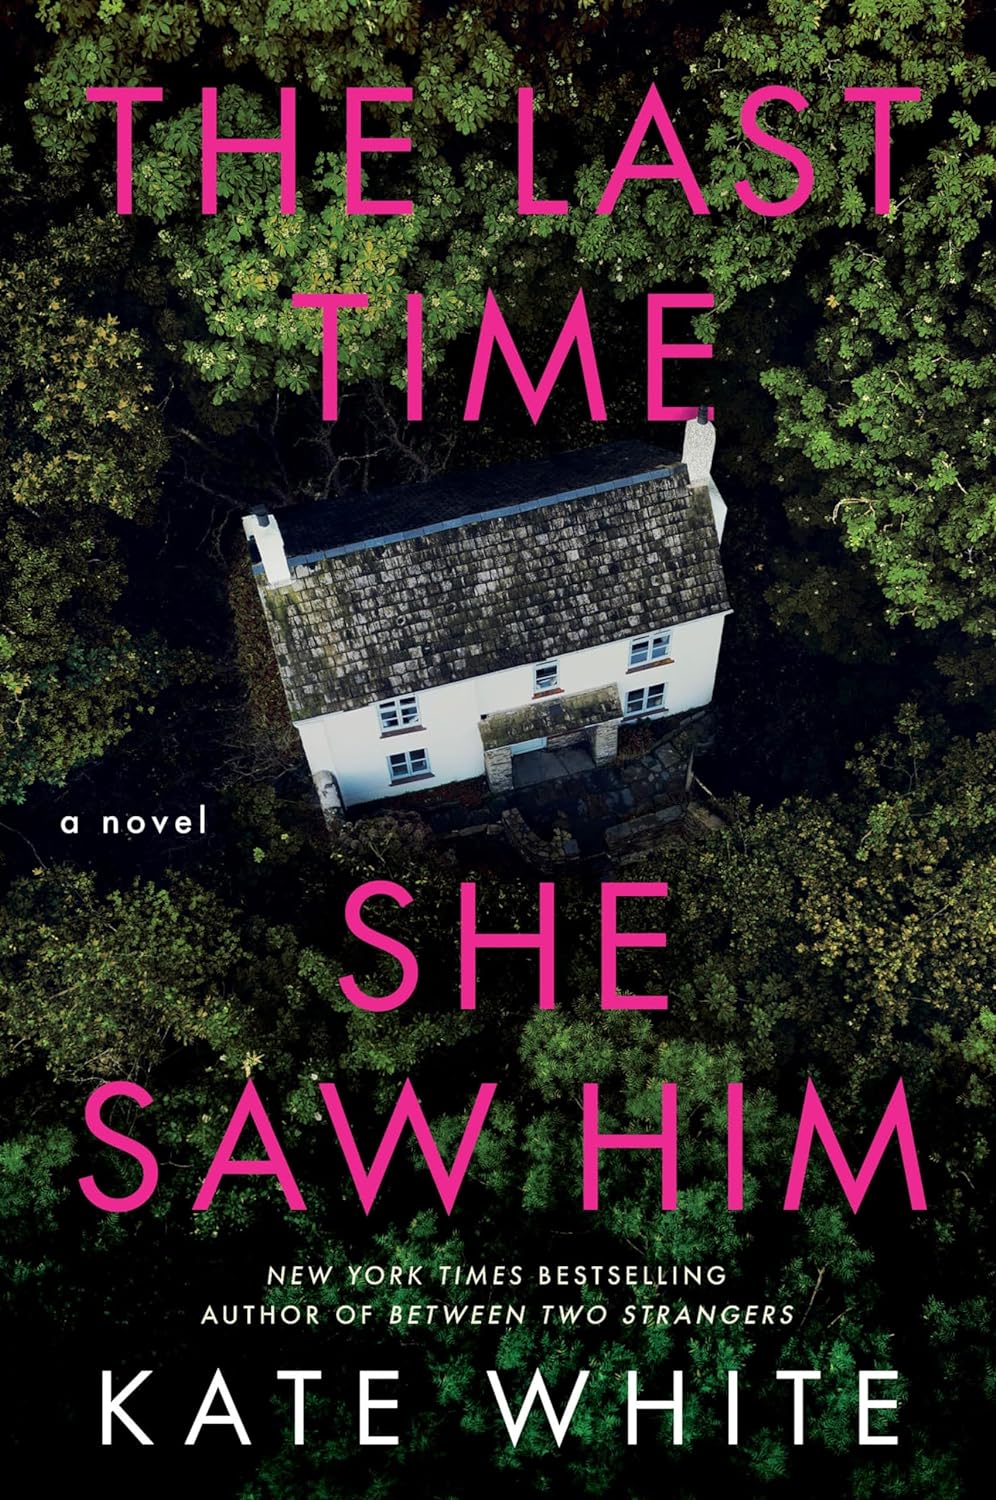 Image for "The Last Time She Saw Him"